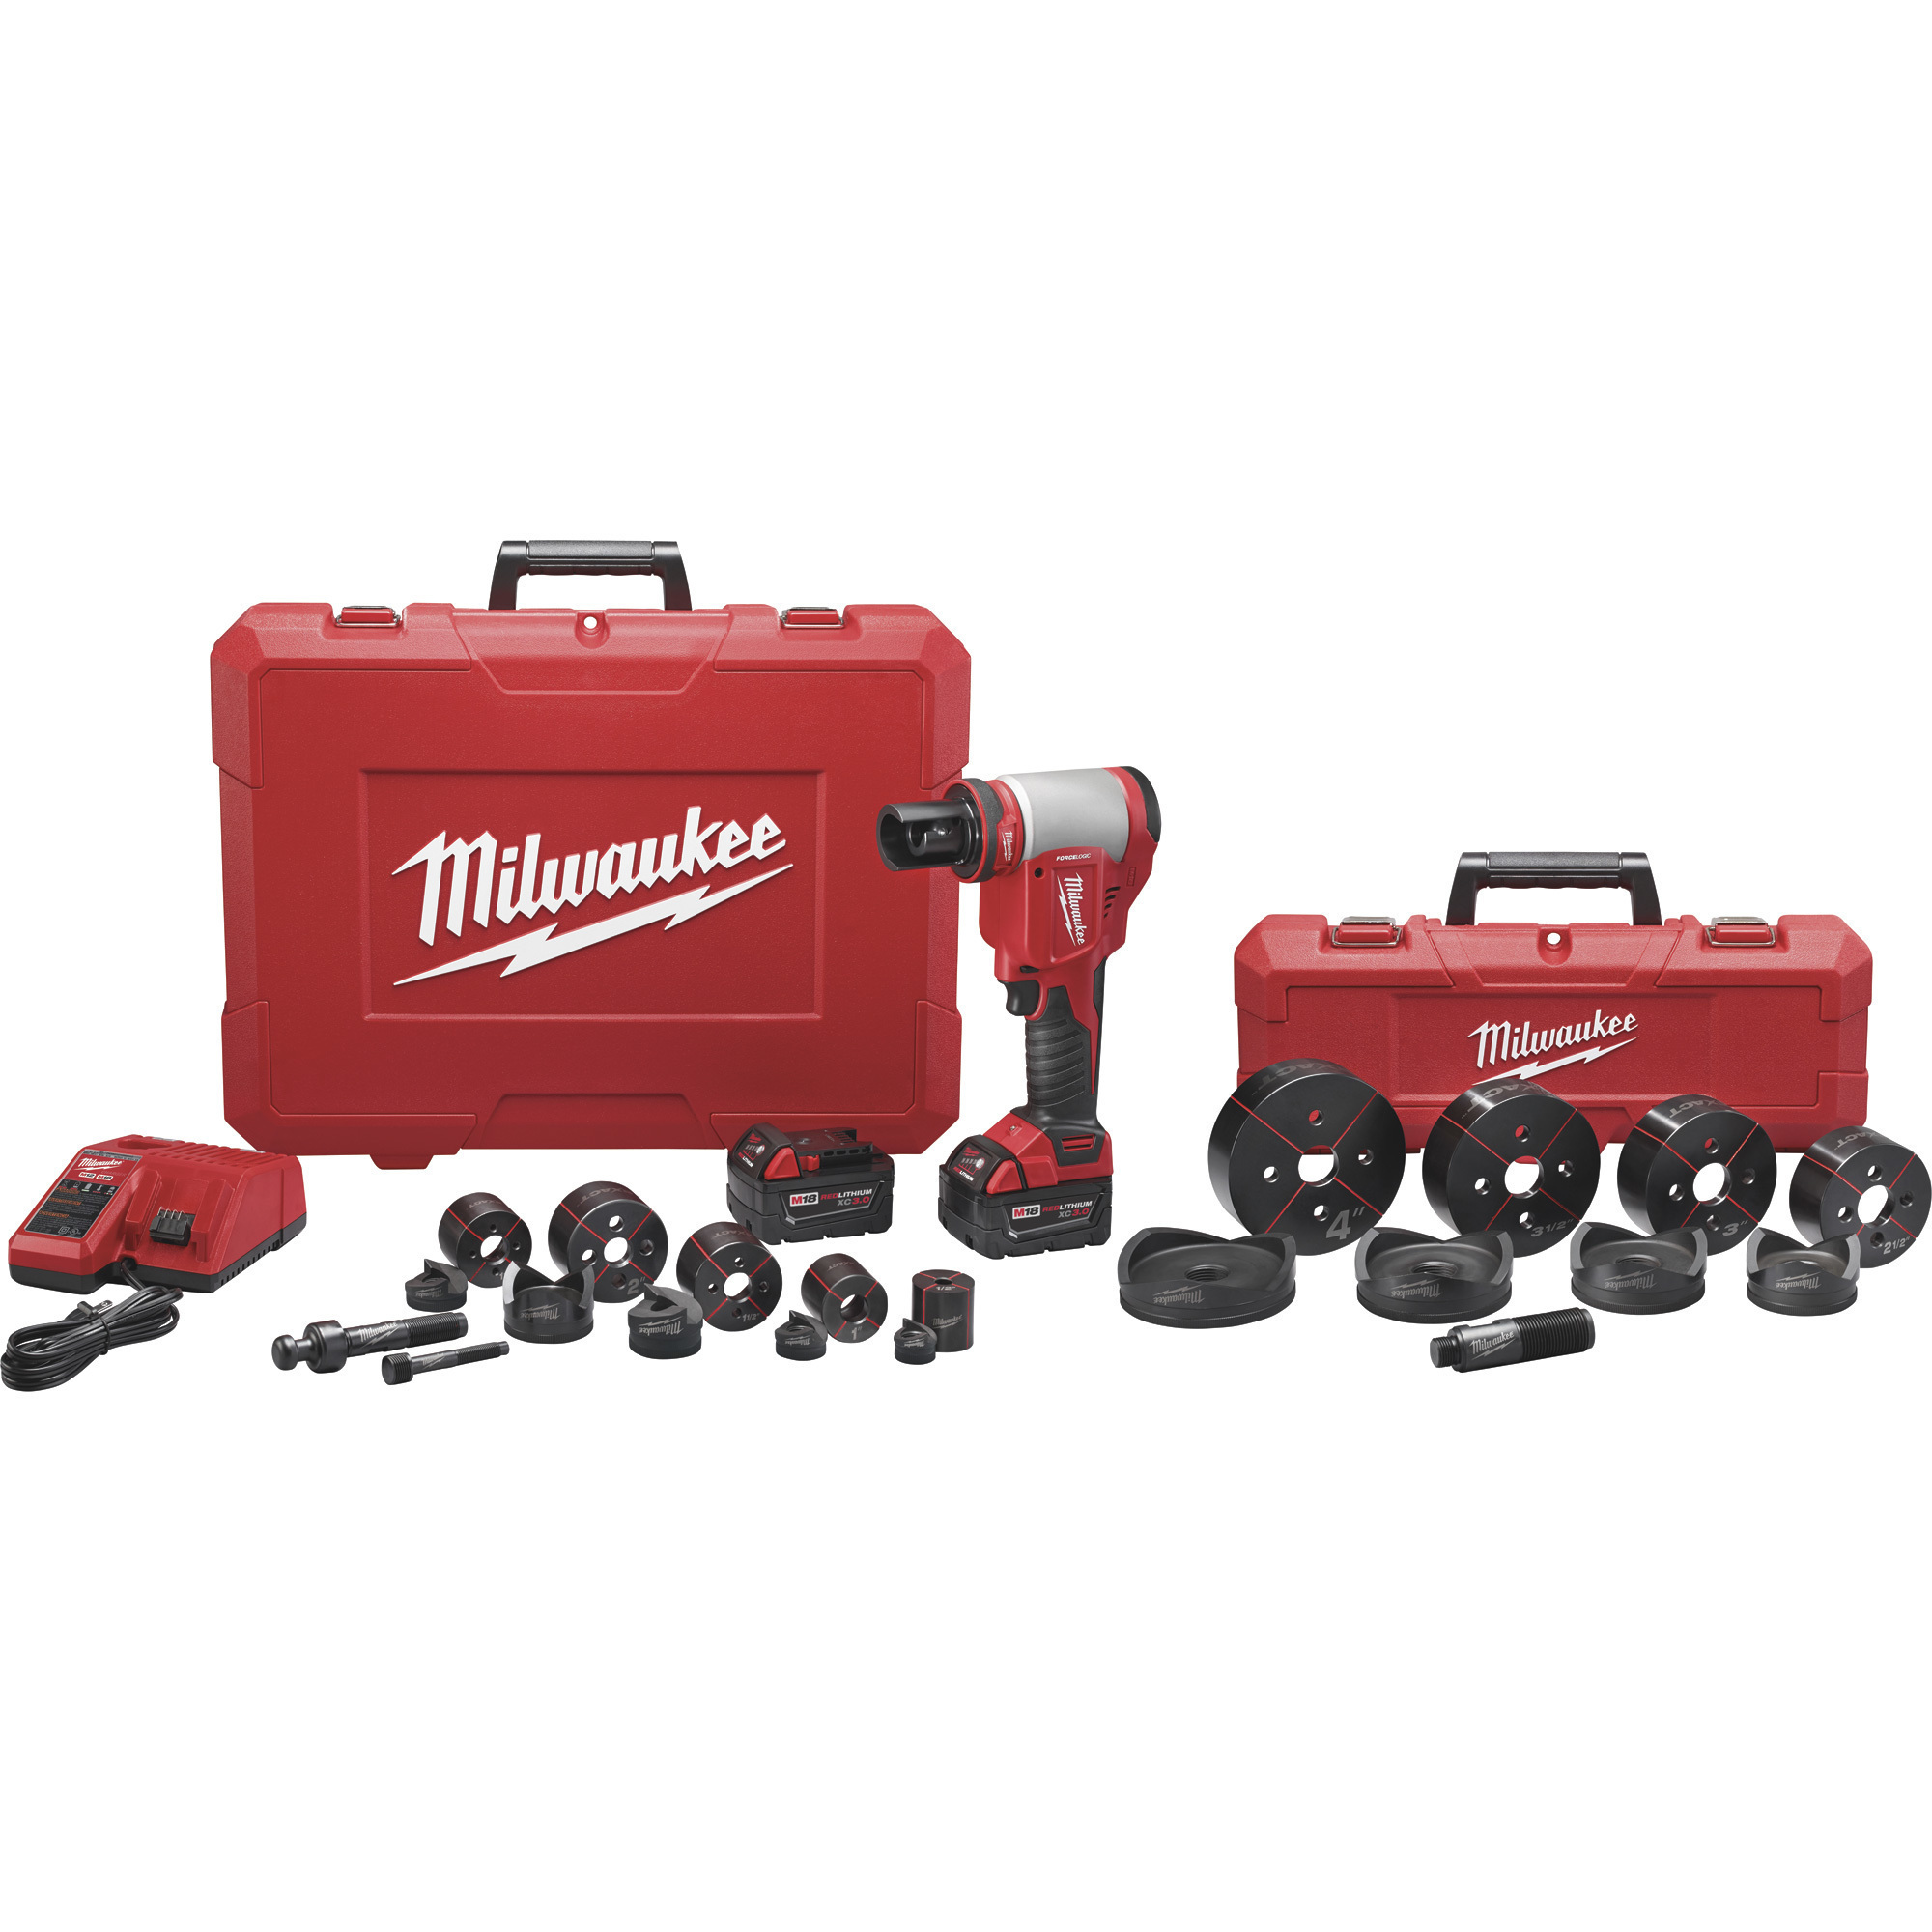 Milwaukee ForceLogic M18 Cordless 10-Ton Knockout Tool Kit, 1/2Inch-4Inch, 2 Batteries, Model 2676-23